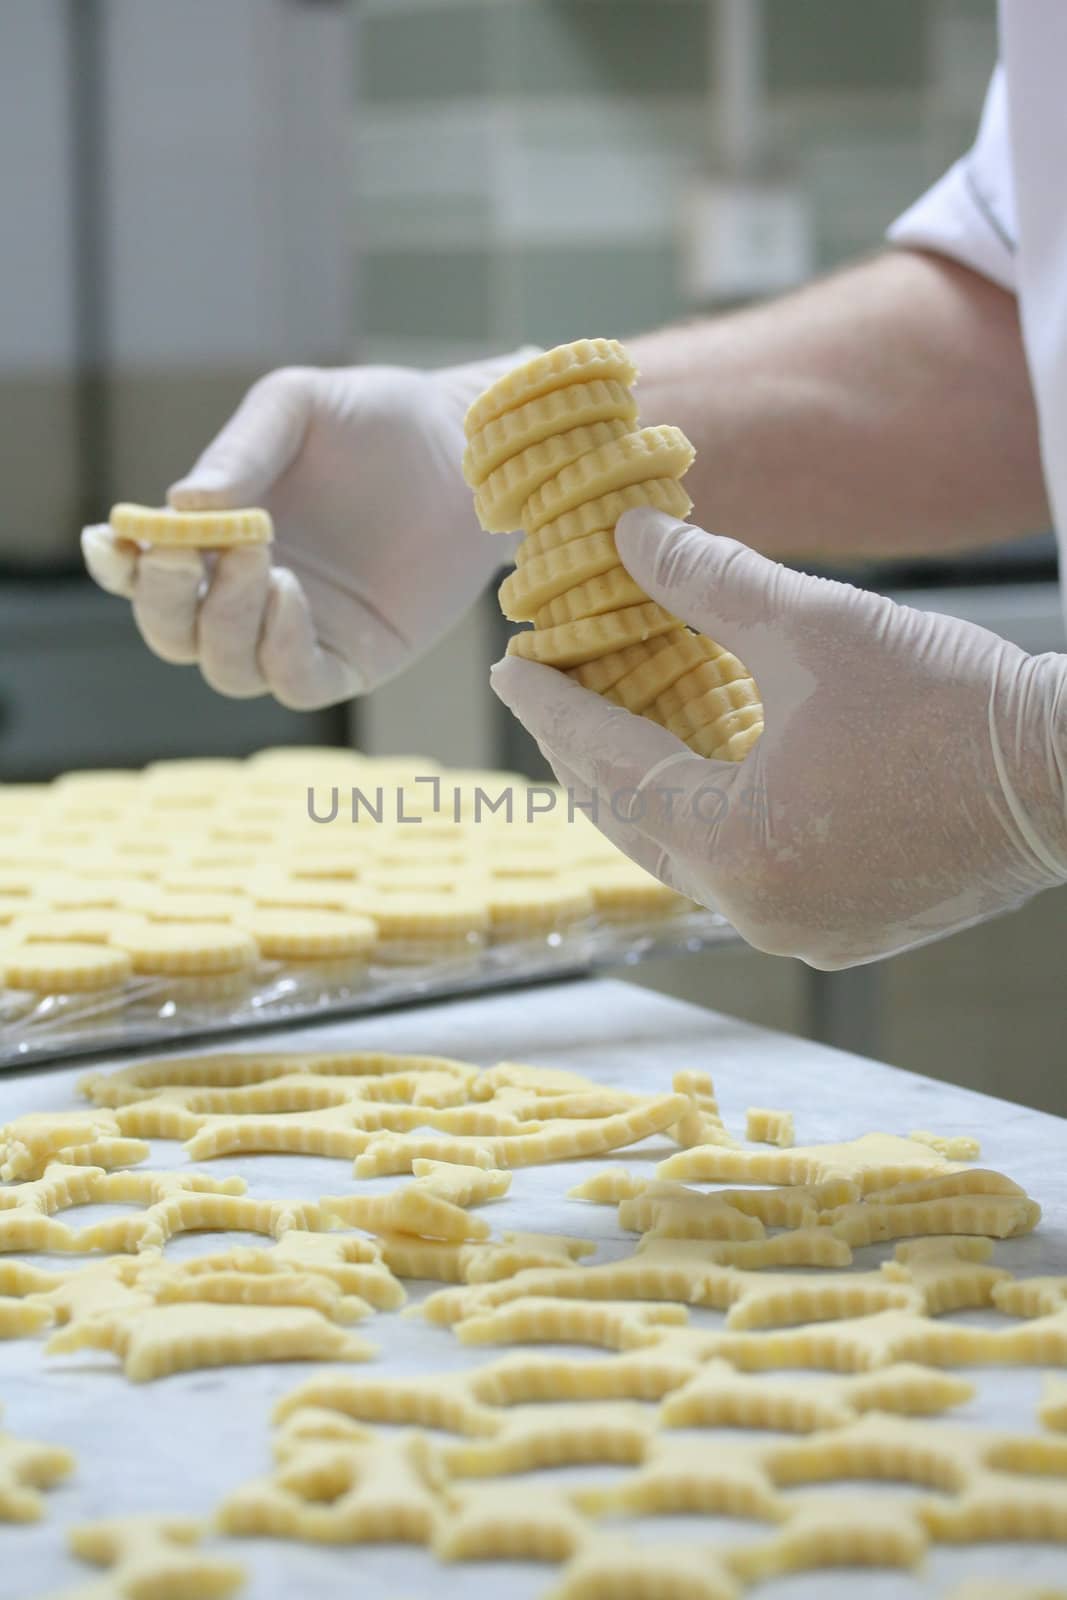 Pastry making biscuits with white gloves